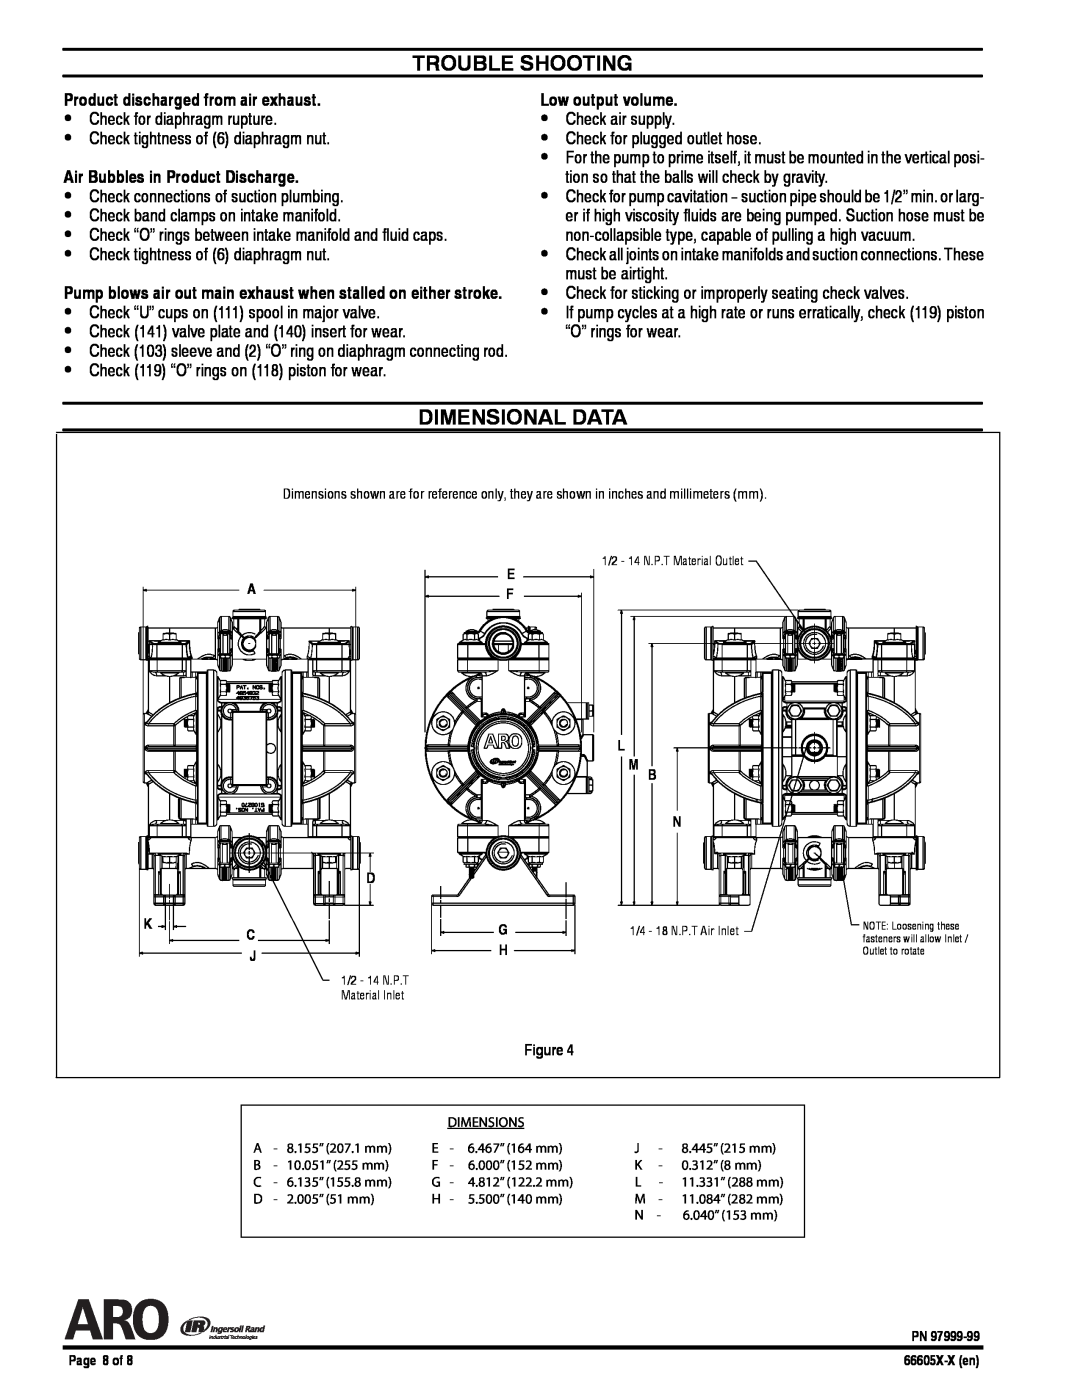 Ingersoll-Rand 66605X-X manual Trouble Shooting, Dimensional Data, Product discharged from air exhaust, Low output volume 